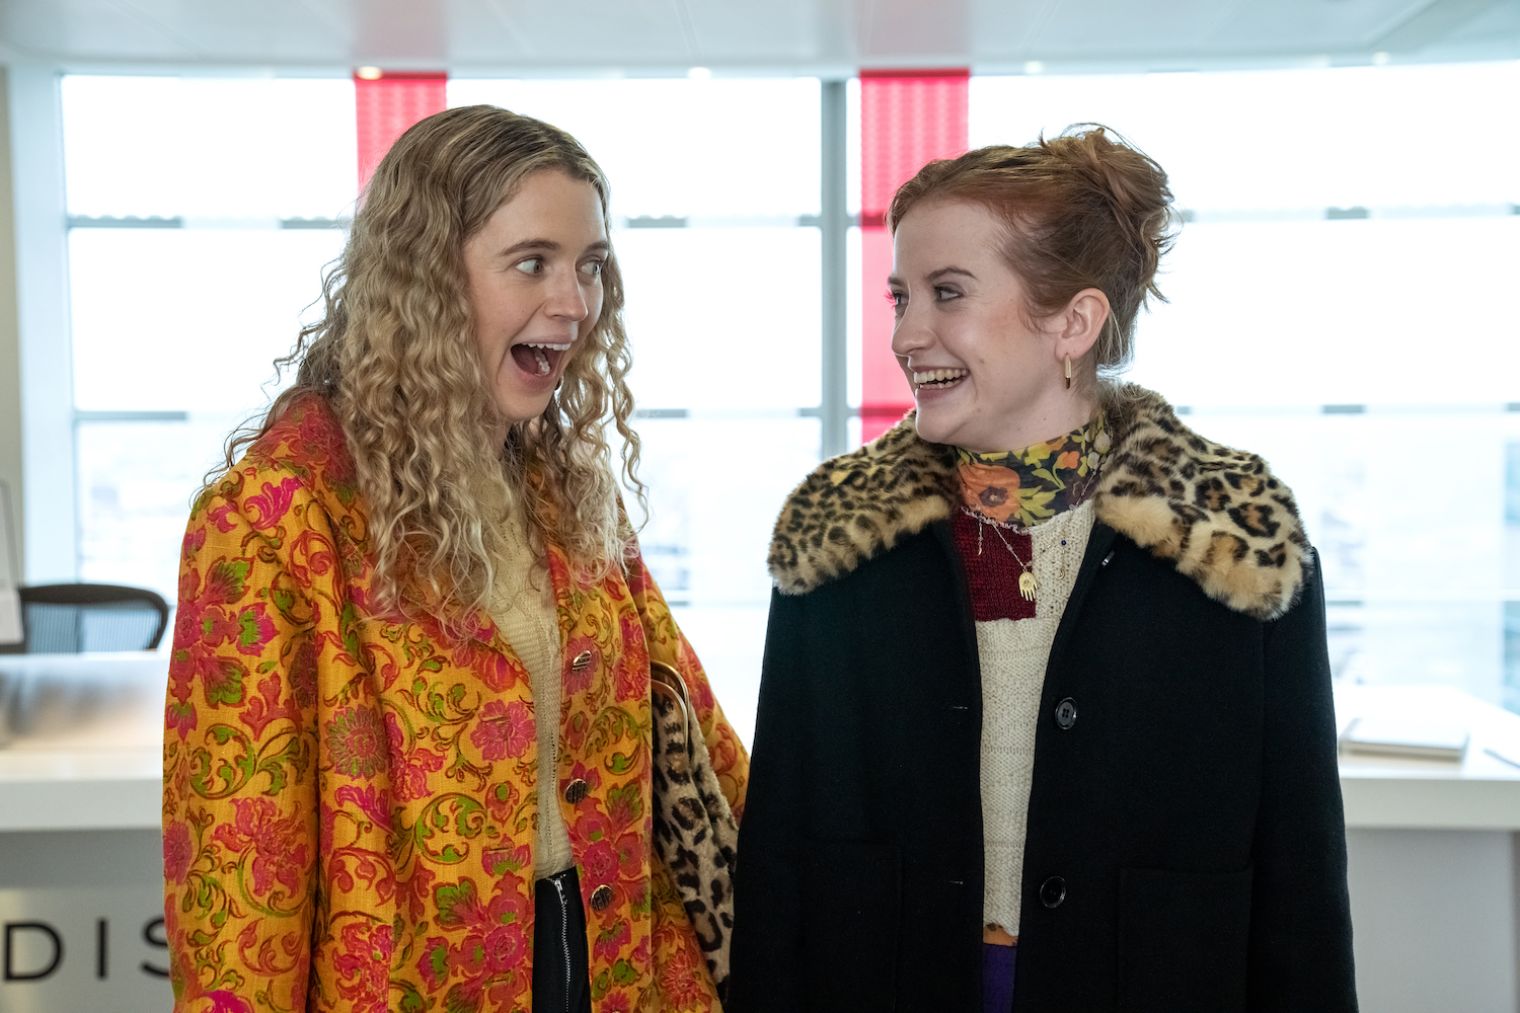 Máiréad Tyers and Sofia Oxenham star as best friends Jen and Carrie in Series 2 of ‘Extraordinary’ which lands on Disney+ today